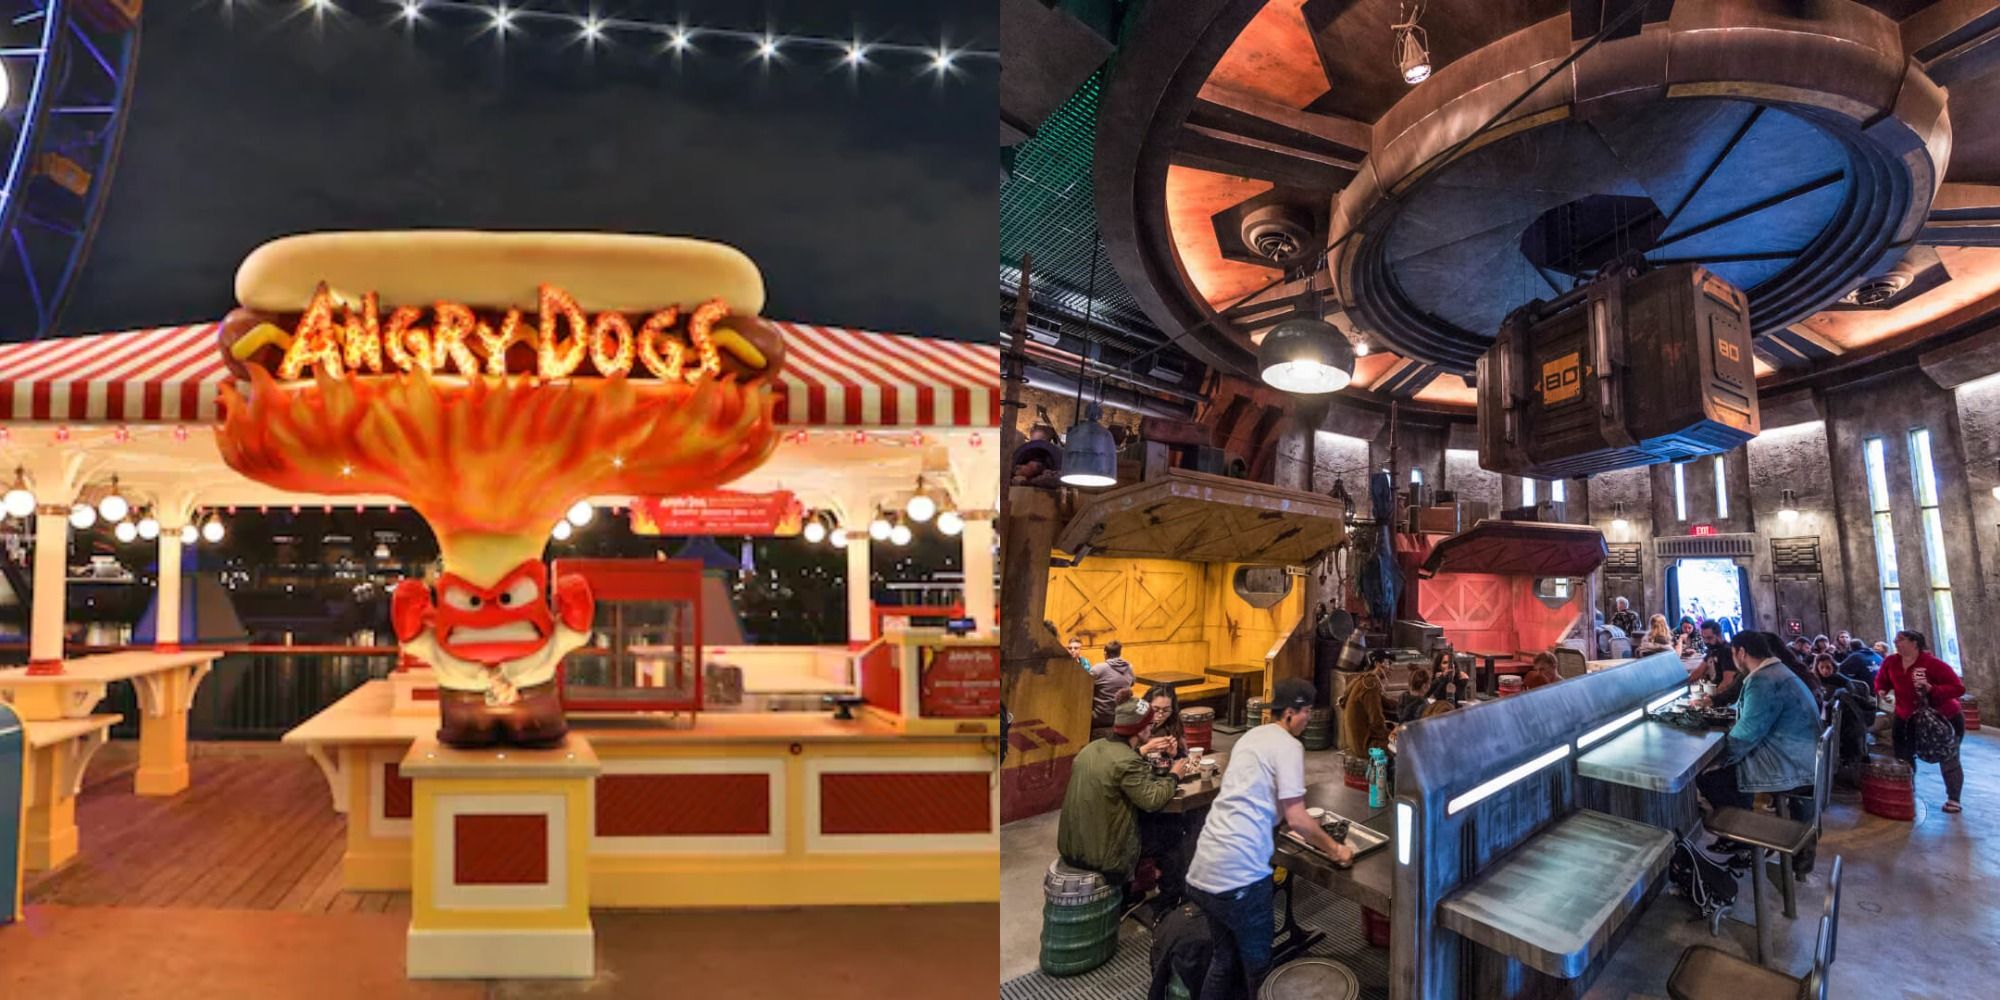 Split image of the Angry Dogs and Docking Bay 7 Food & Cargo restaurants at Disneyland